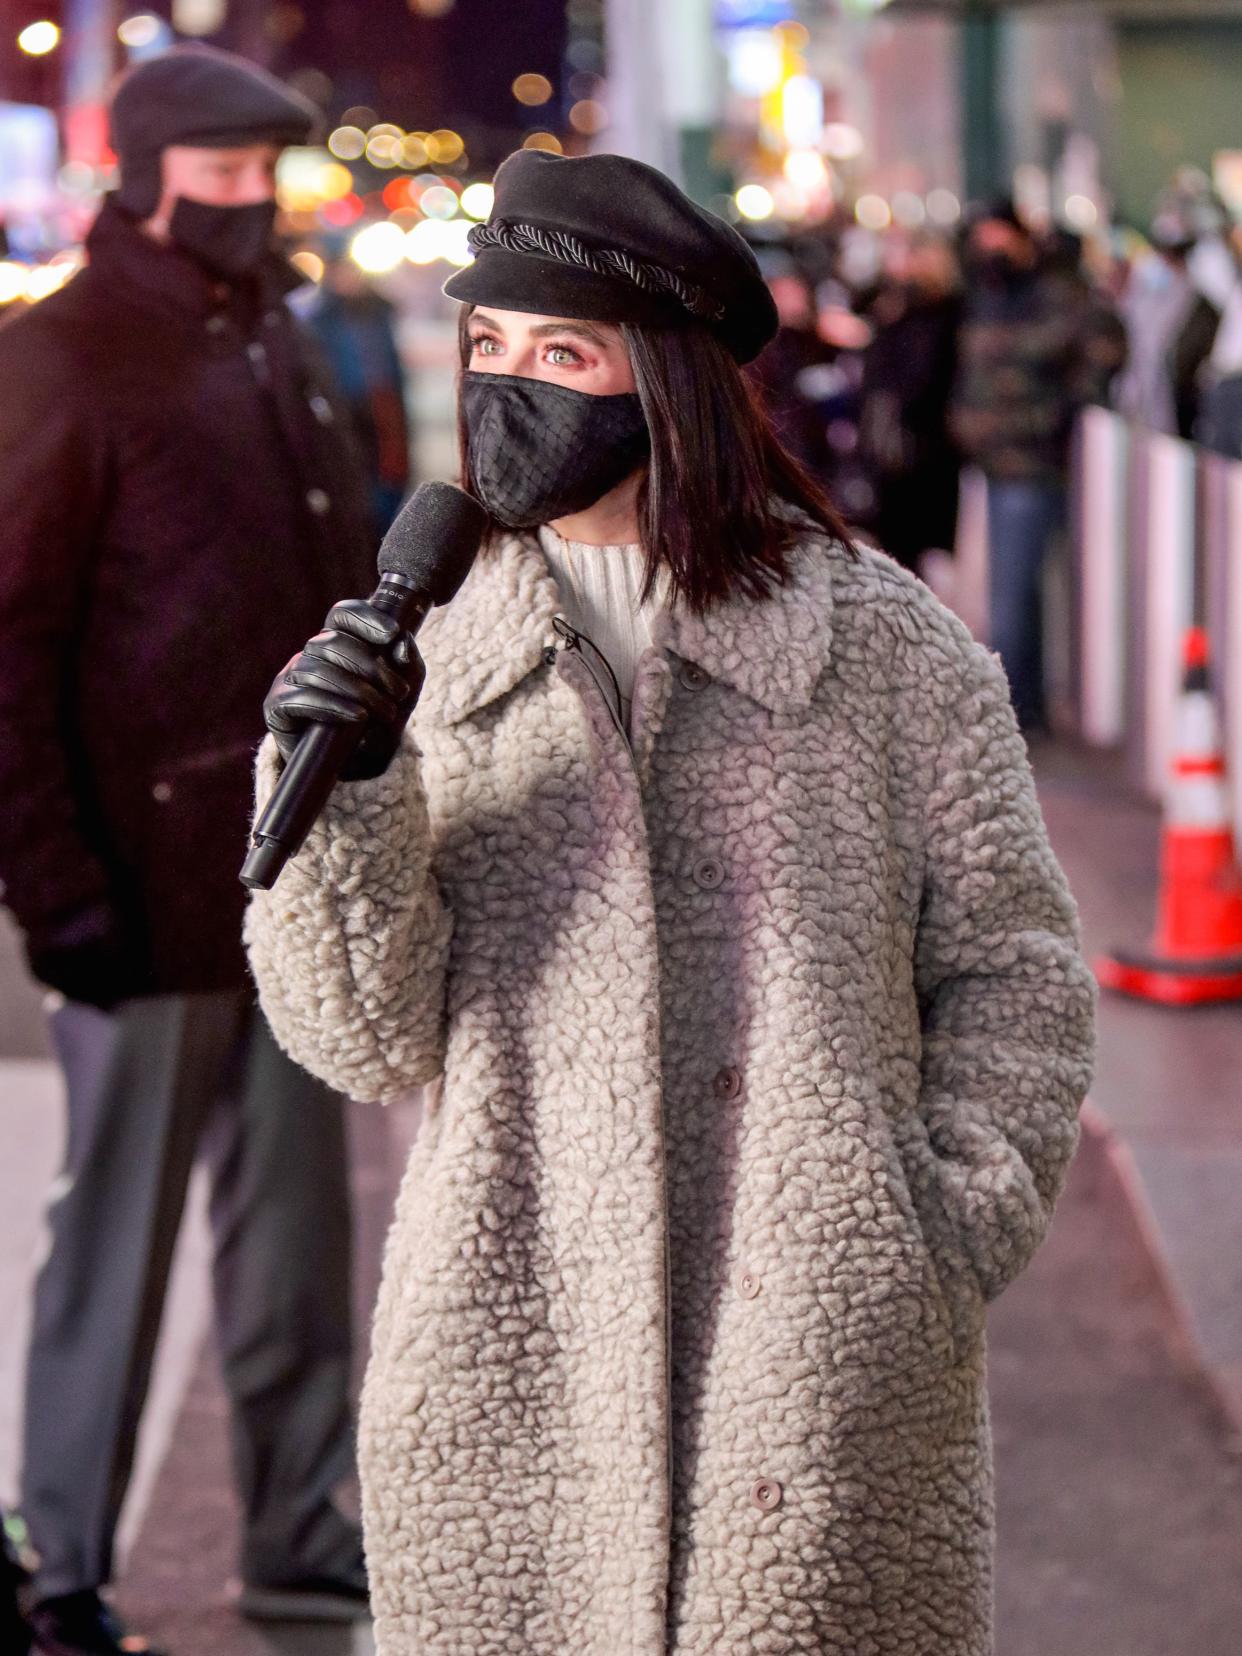 Lucy Hale is seen at the "Dick Clark's New Year's Rockin' Eve 2021" at Times Square on Dec. 29, 2020, in New York City.